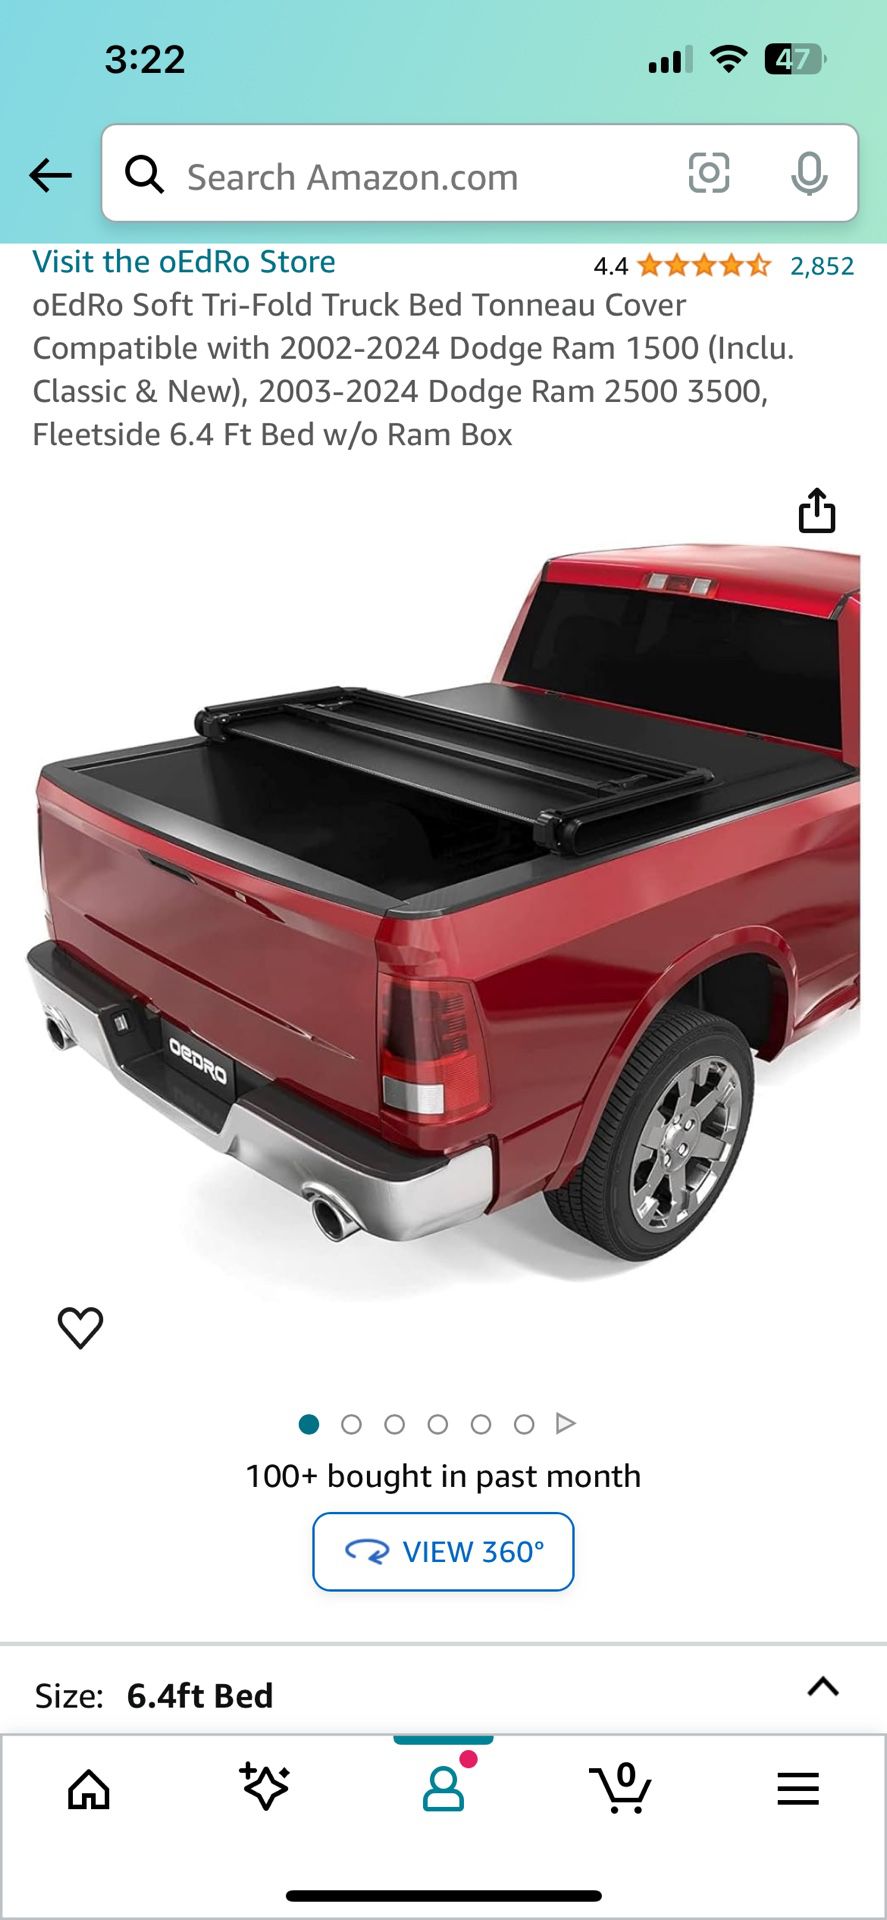 6’4 Bed Cover For A Truck